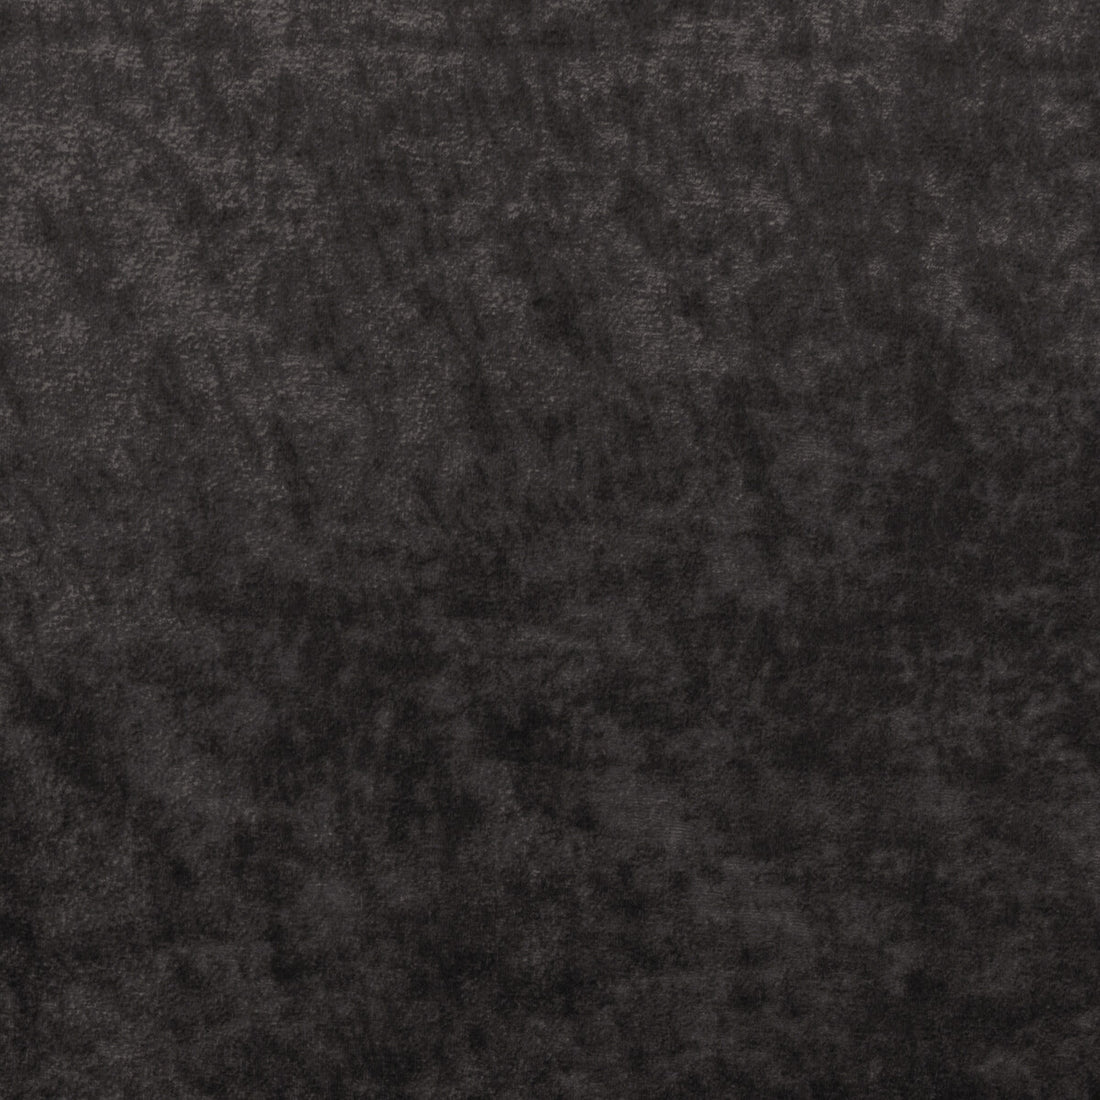 Triumphant fabric in graphite color - pattern 36065.821.0 - by Kravet Couture